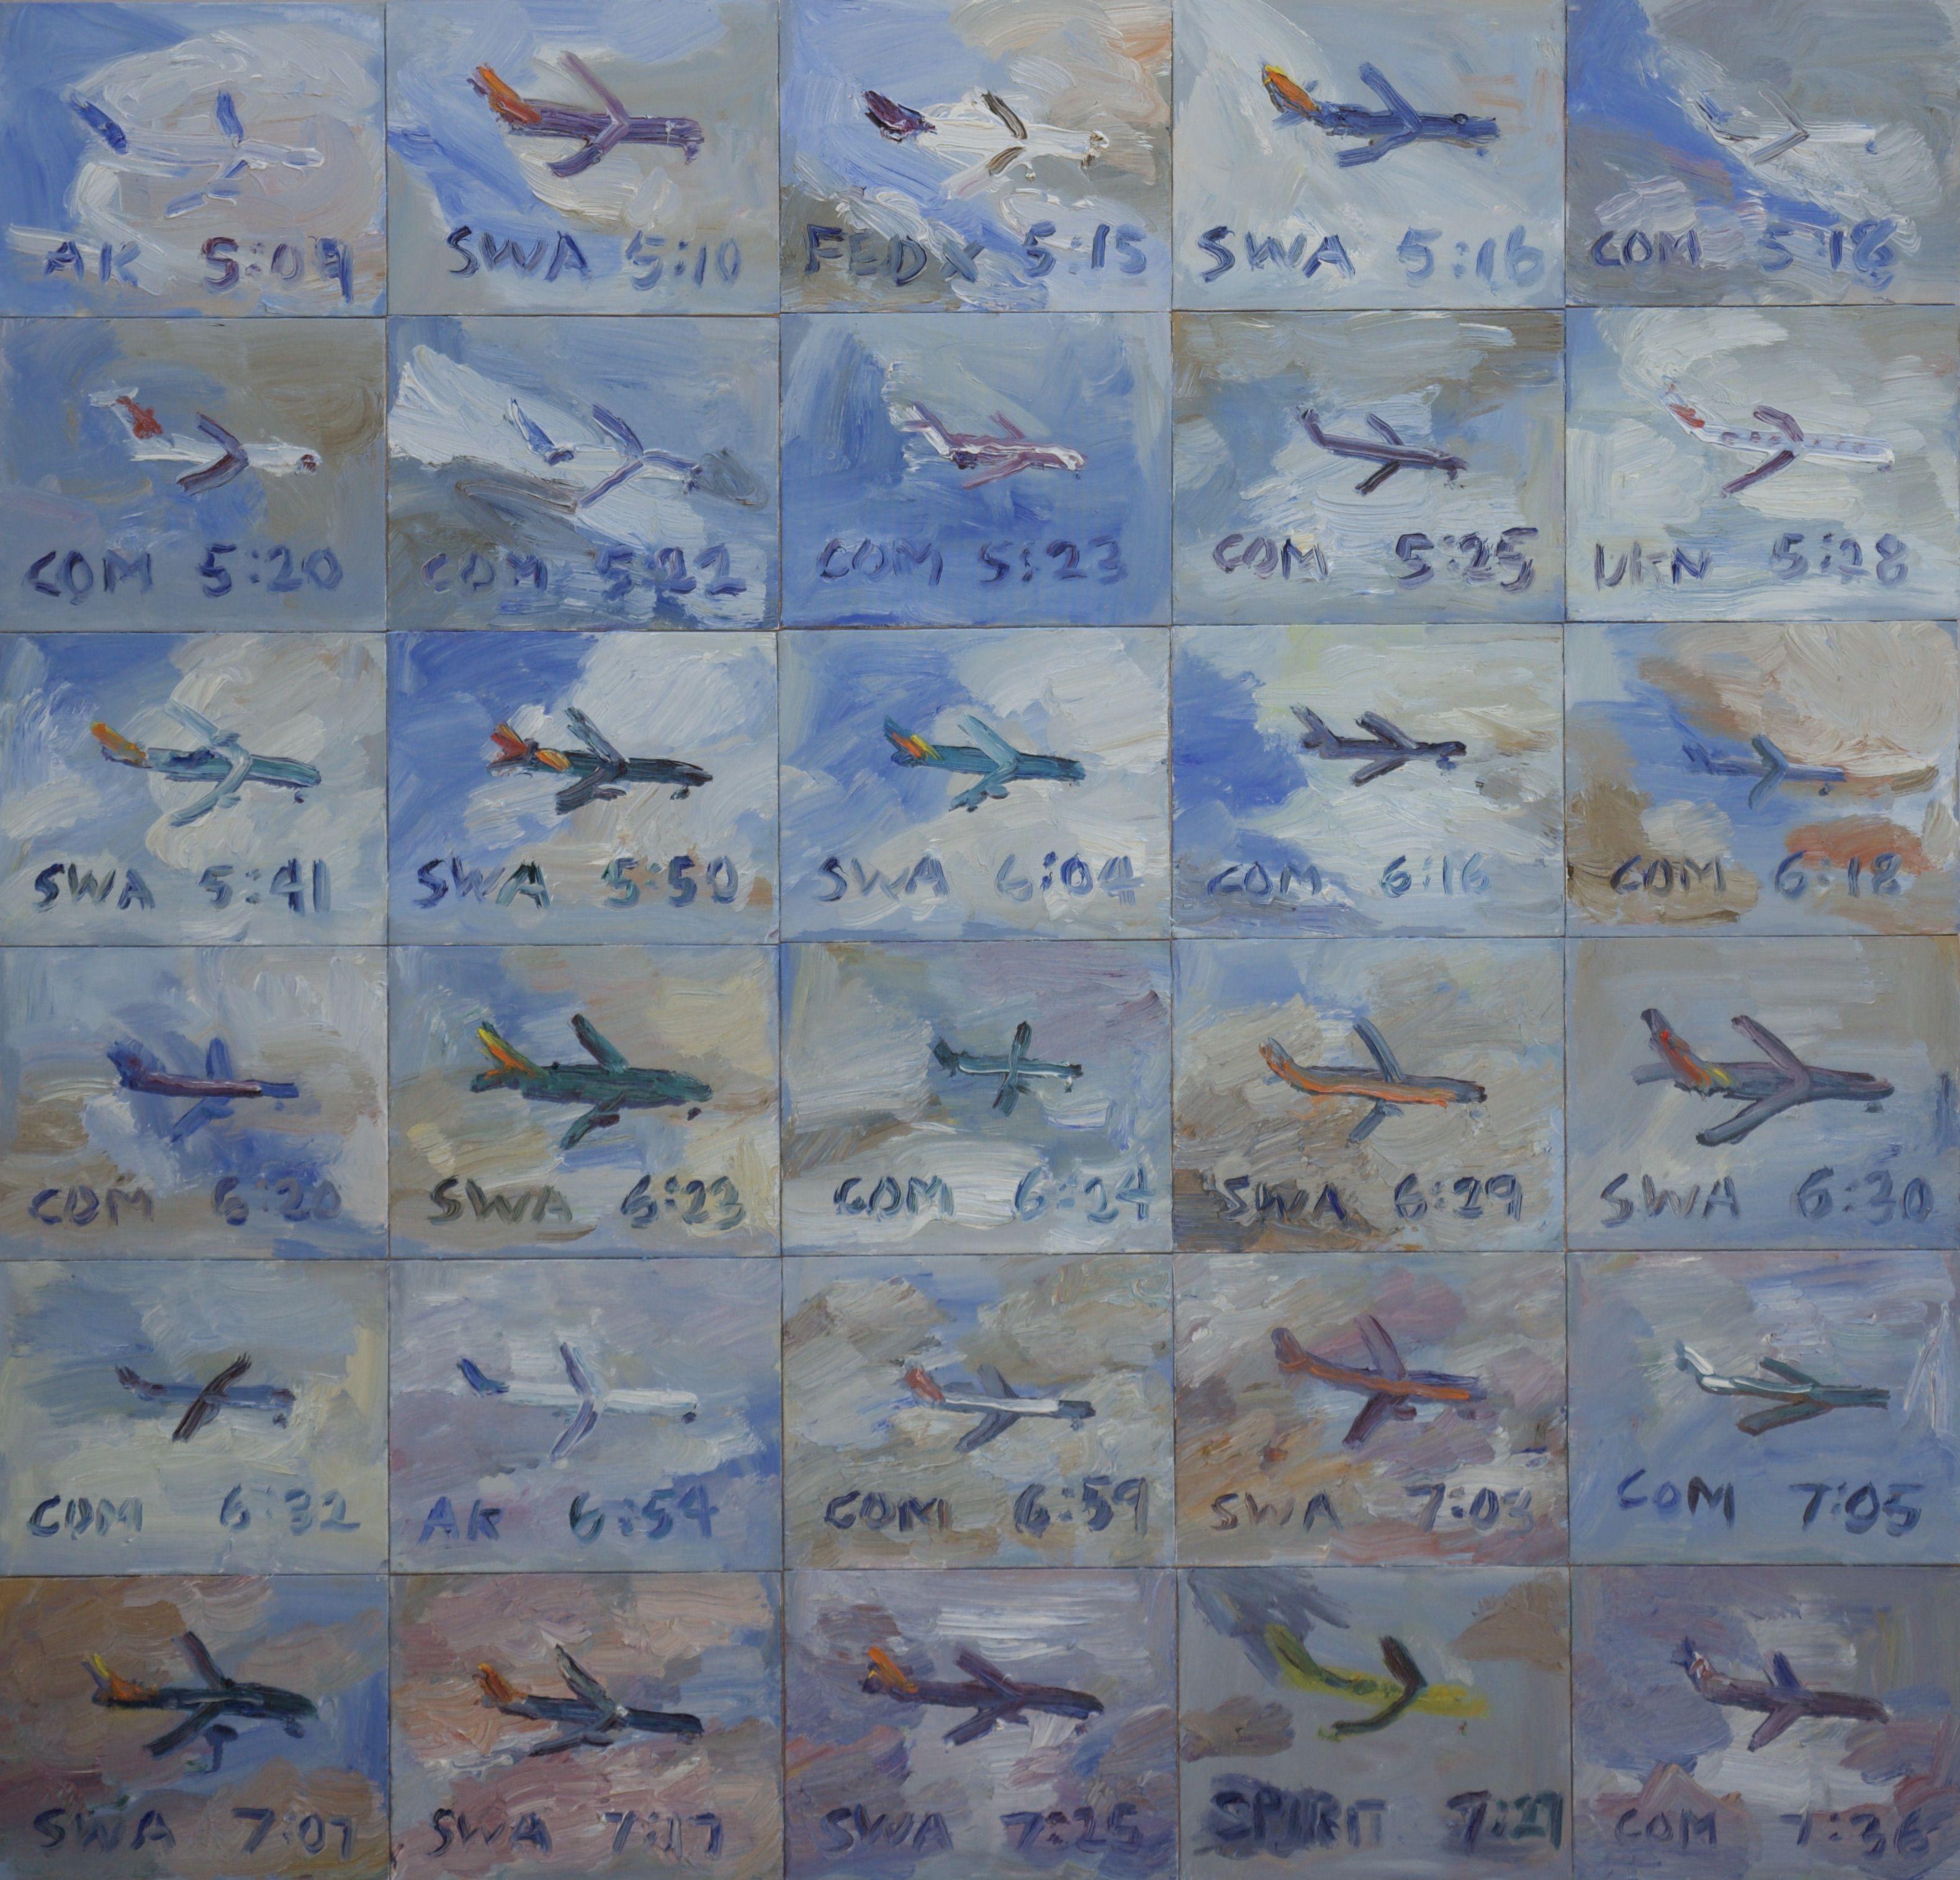 On April 11, 2022, I painted the airplanes landing into Burbank airport from my backyard. I live streamed the event on my YouTube channel Letspainttv. 30 canvas panels mounted onto a wood frame. :: Painting :: Contemporary :: This piece comes with